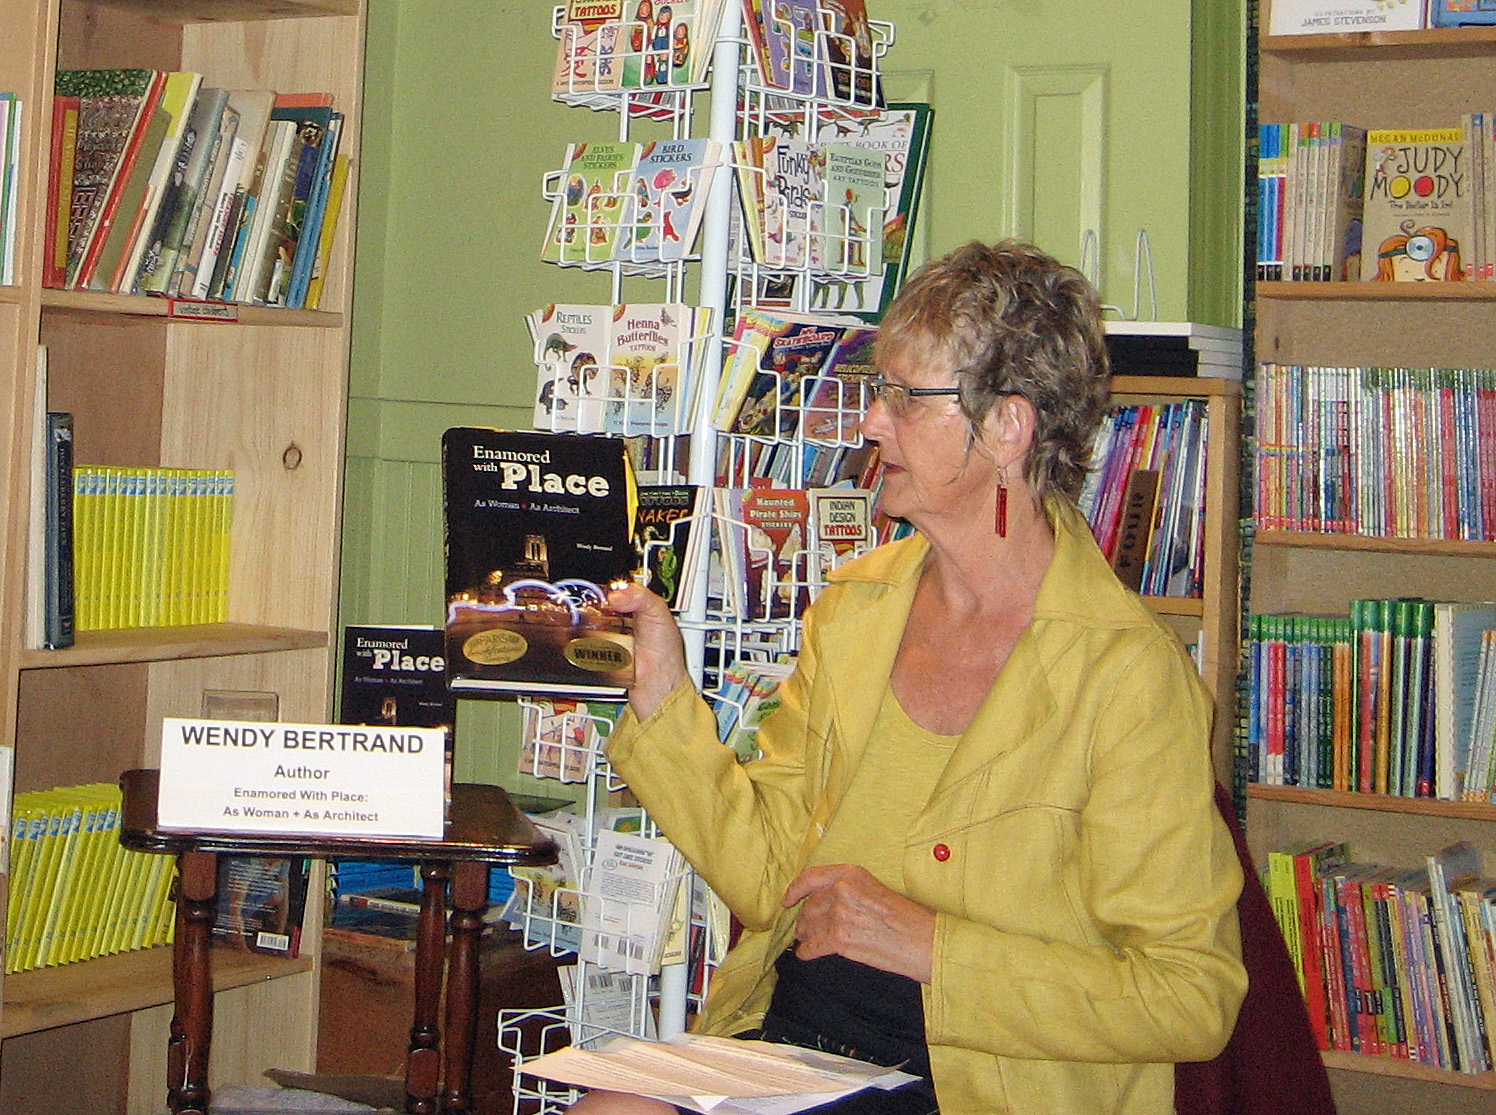 Book in hand at Phoenix bookstore Sept 2013